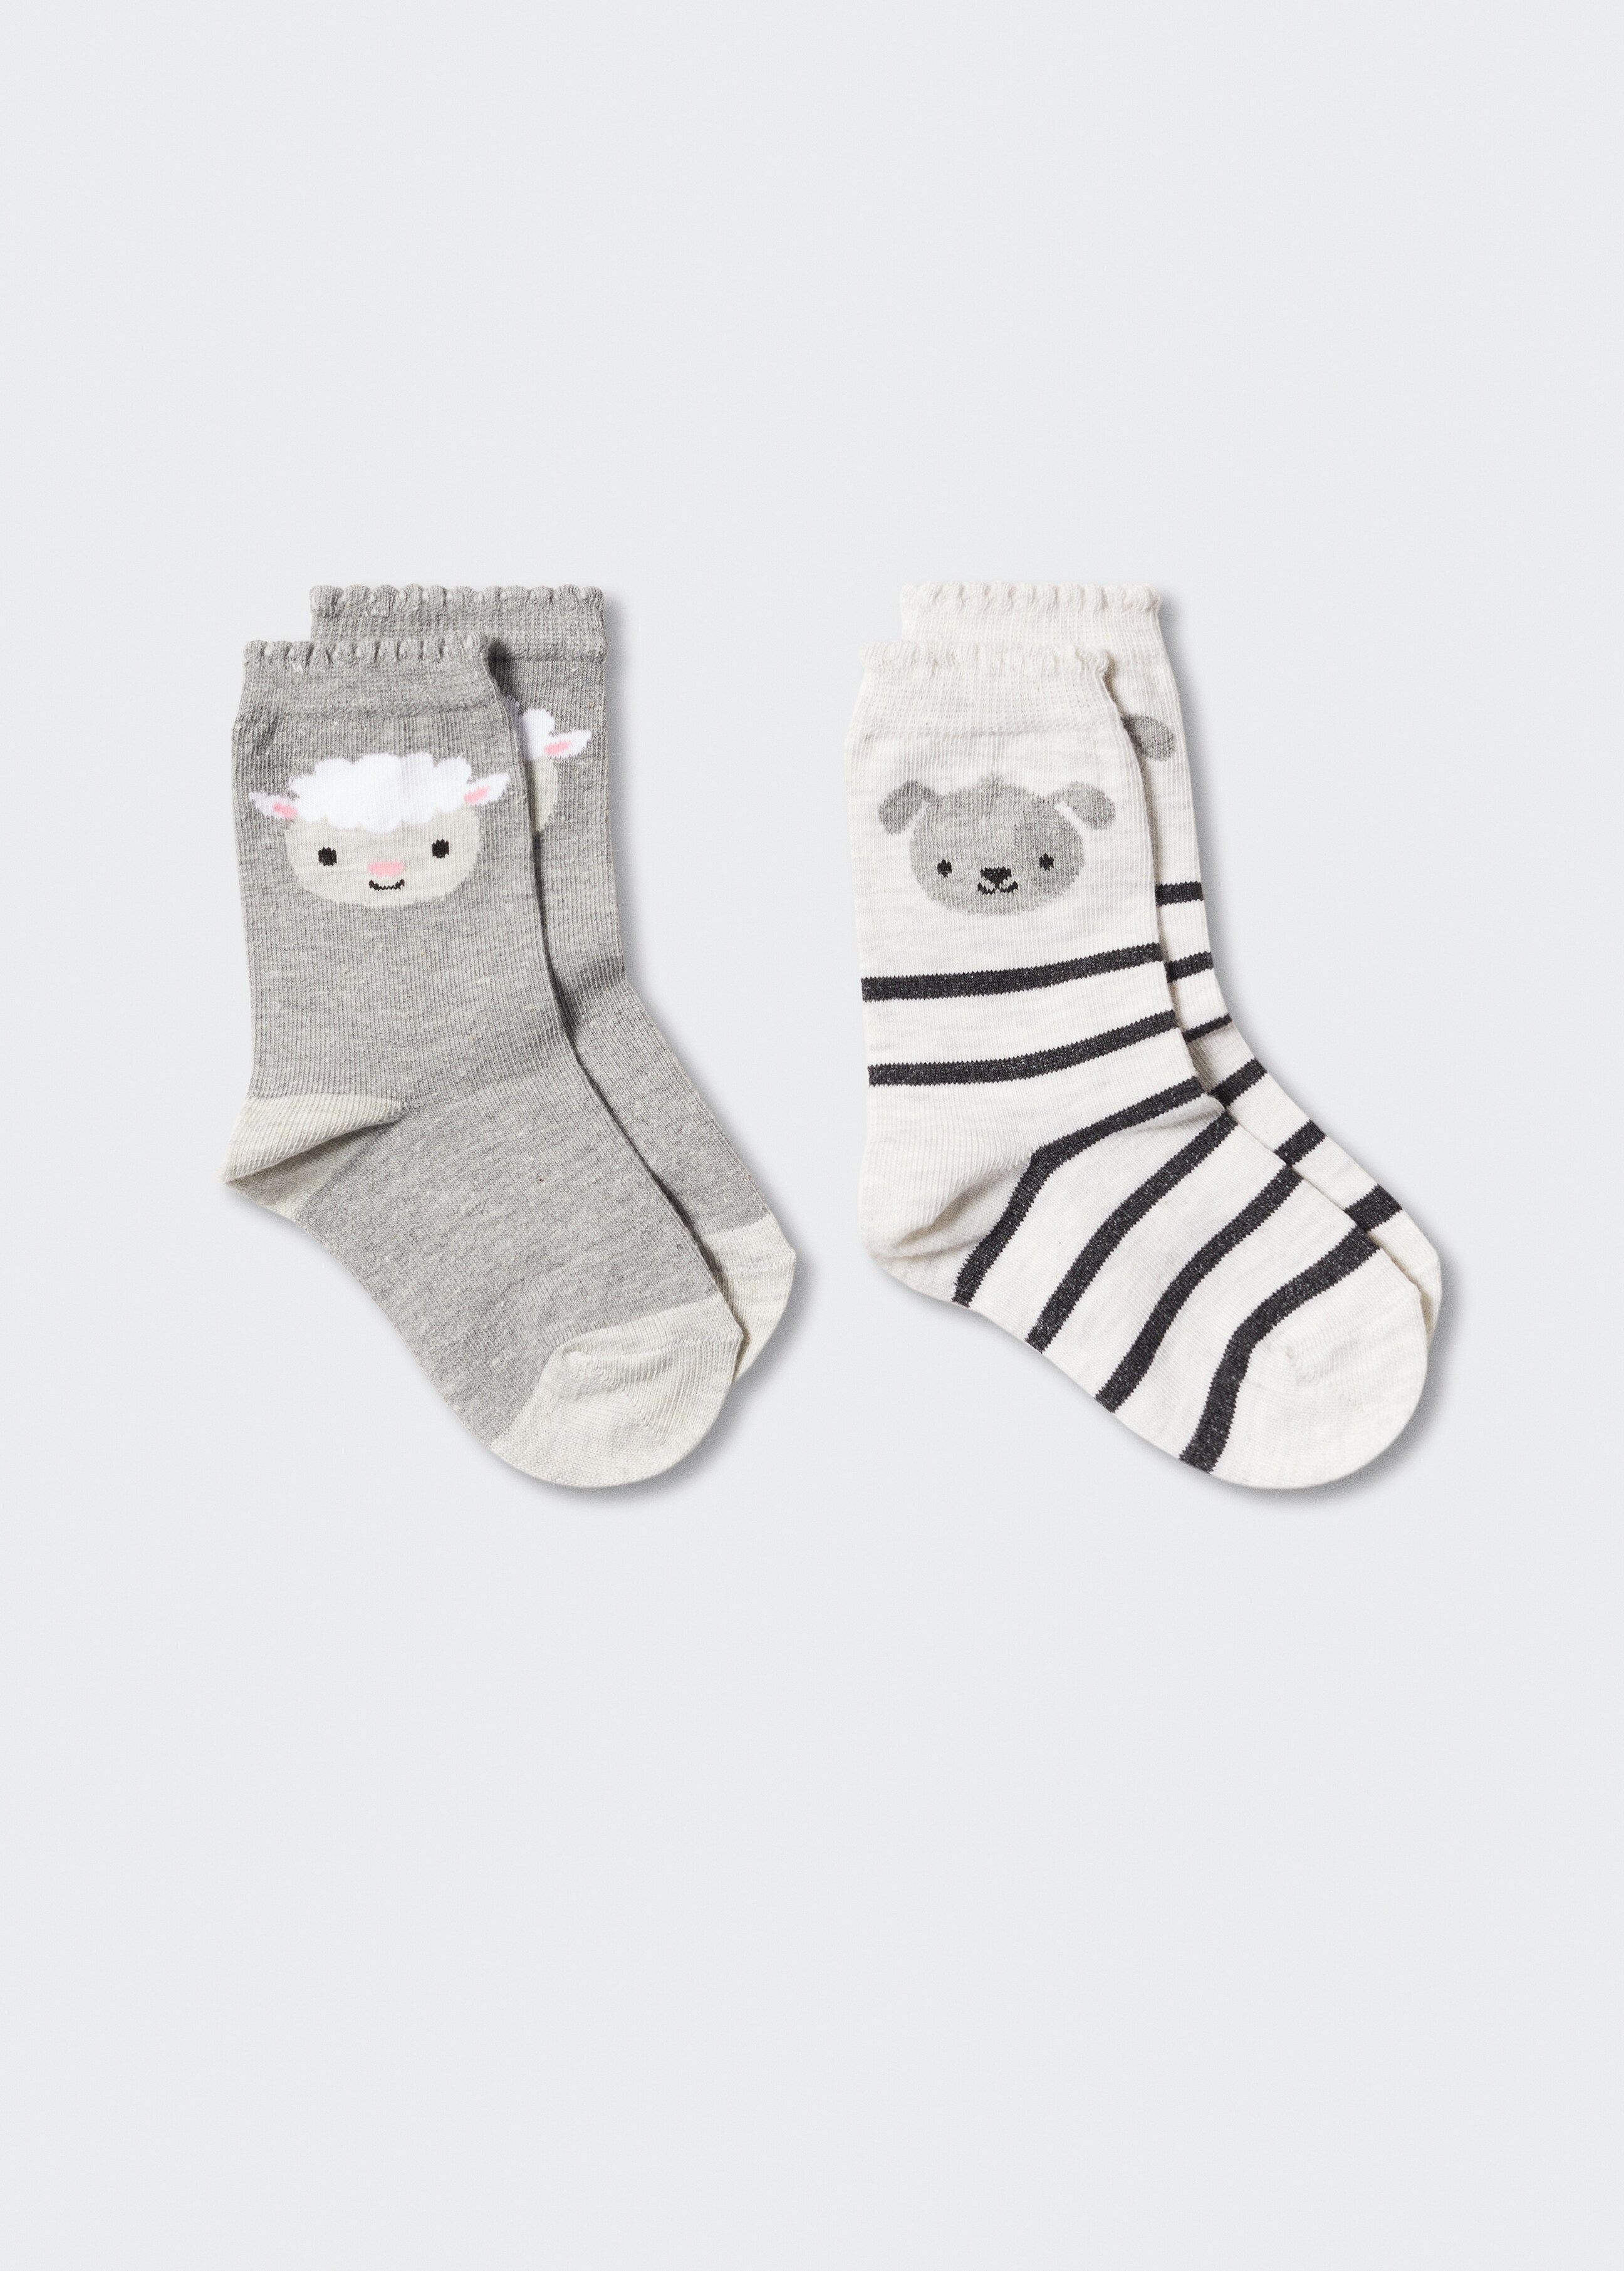 2 pack printed socks - Article without model